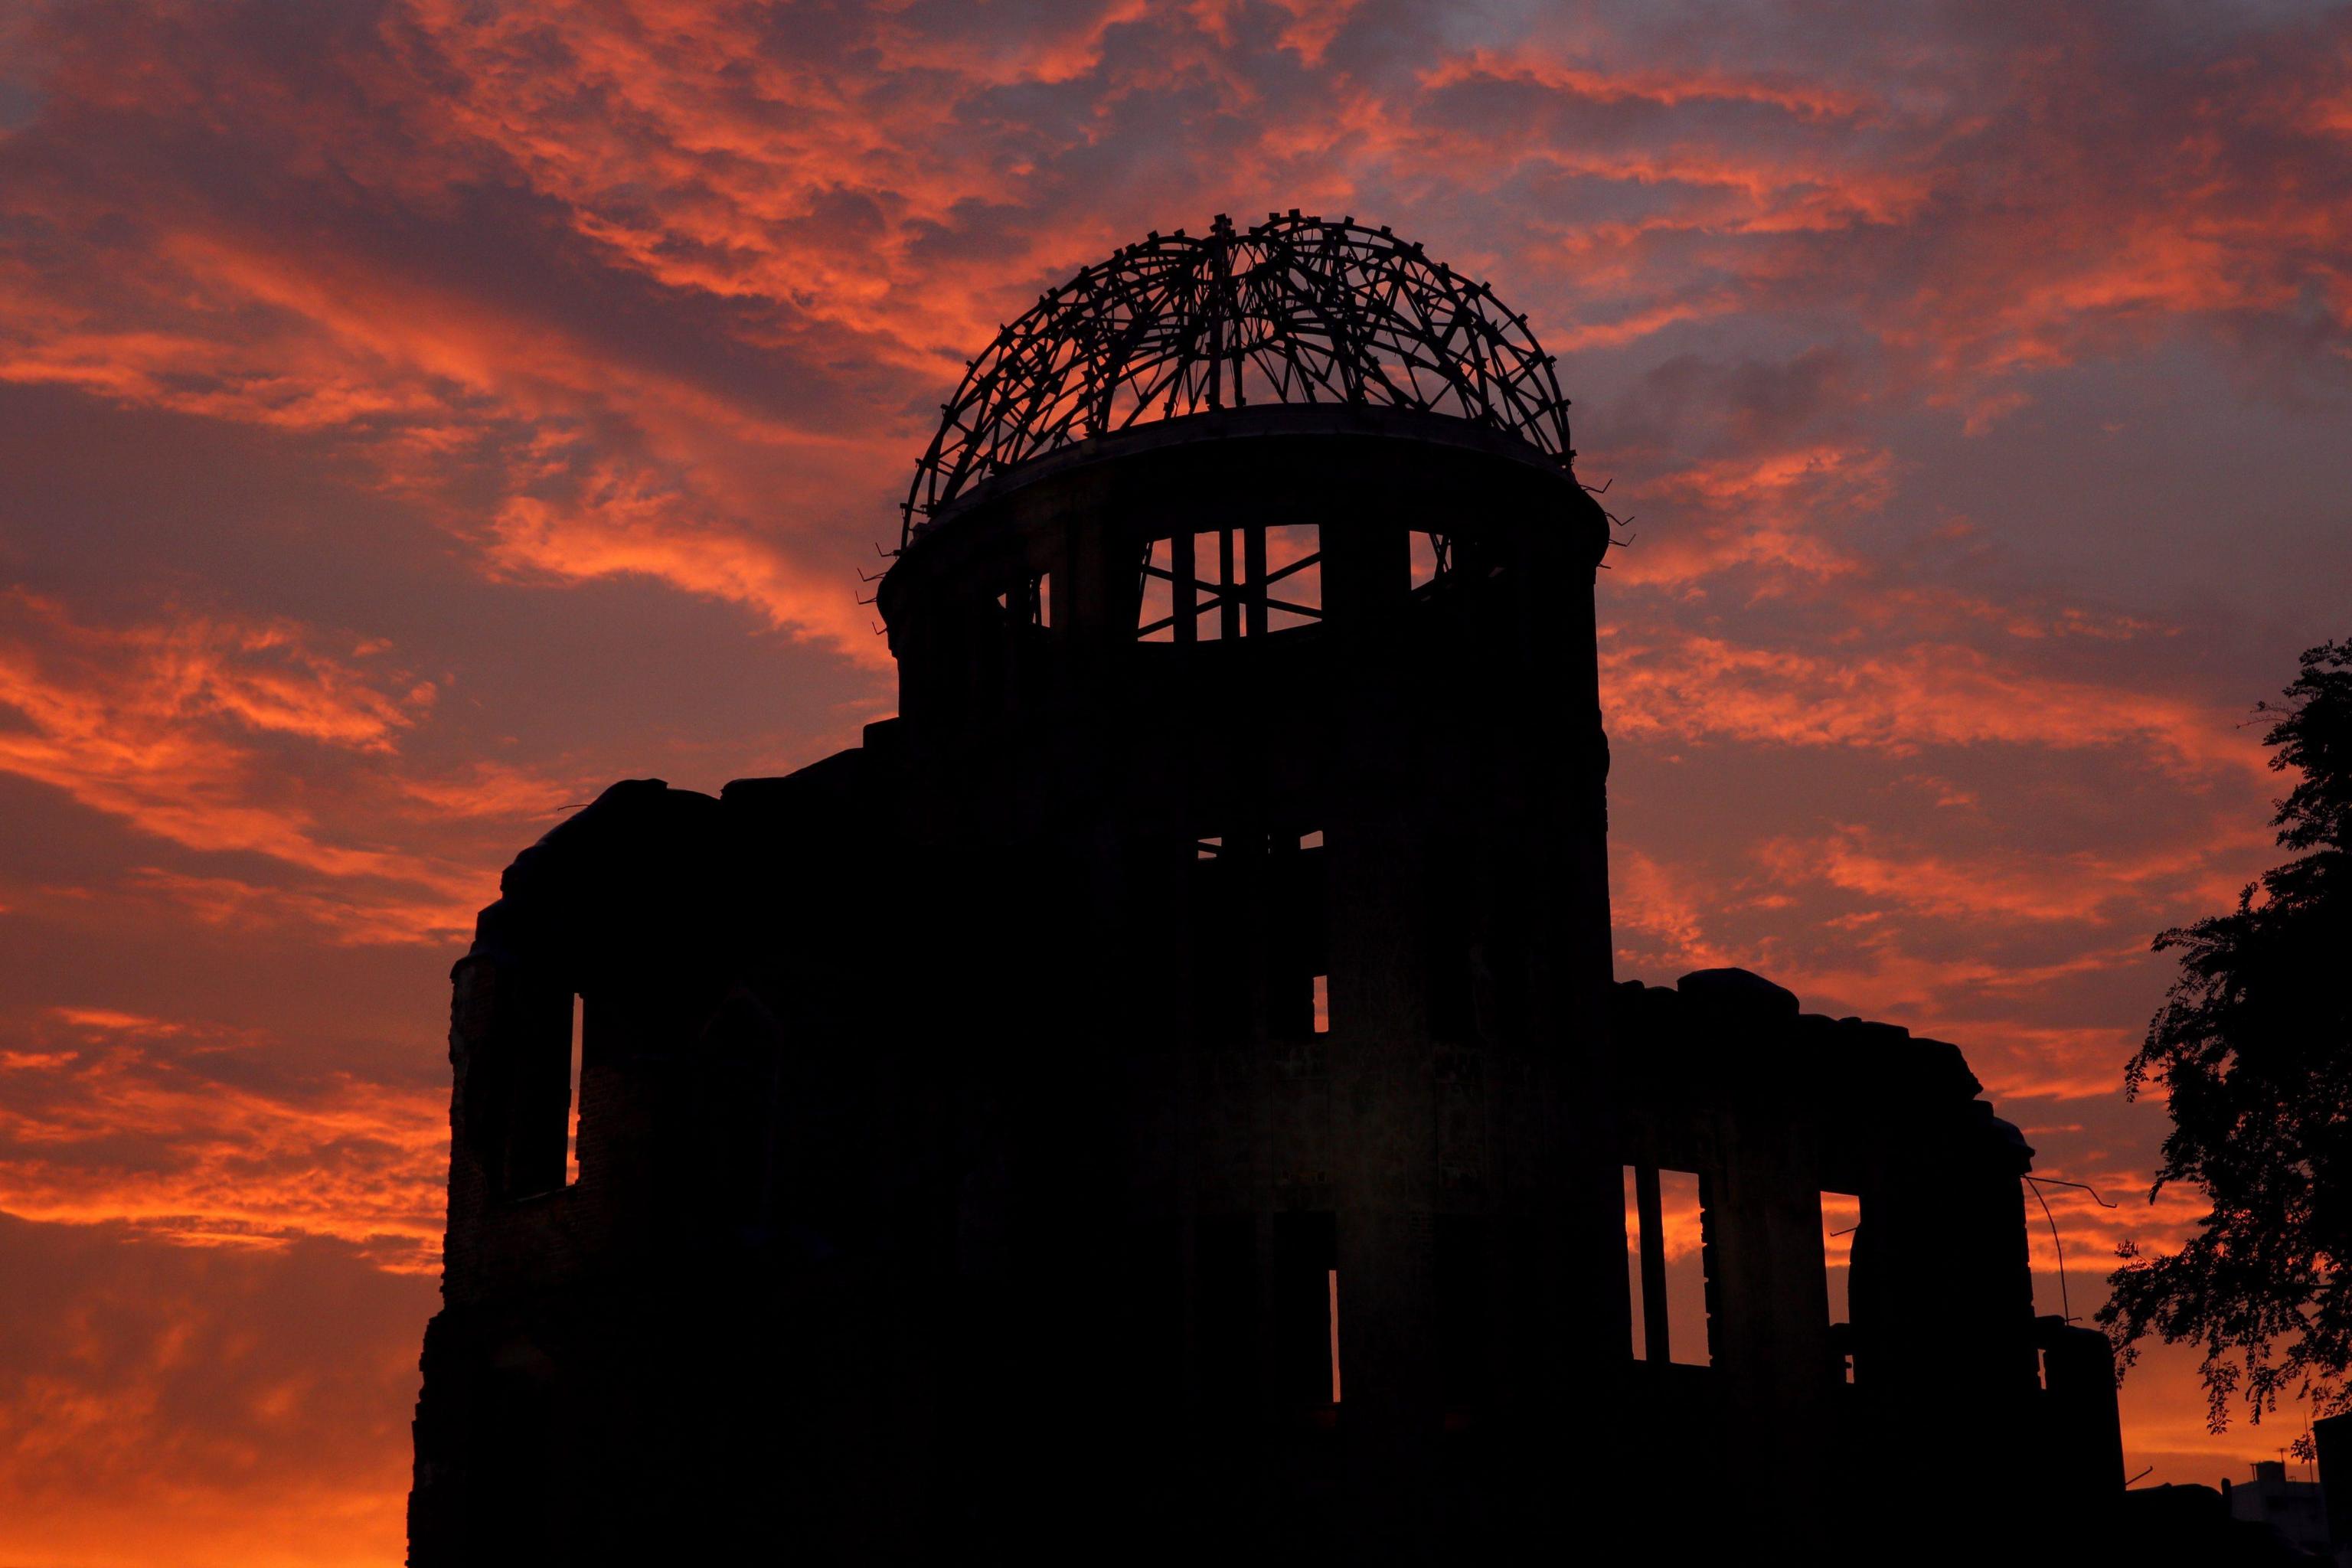 epa03813826 The Atomic Bomb Dome during dusk at Peace Memorial Park in Hiroshima, western Japan, 05 August 2013. Hiroshima will mark the 68th anniversary of the world's first atomic bombing in 1945 on 06 August.  EPA/KIMIMASA MAYAMA